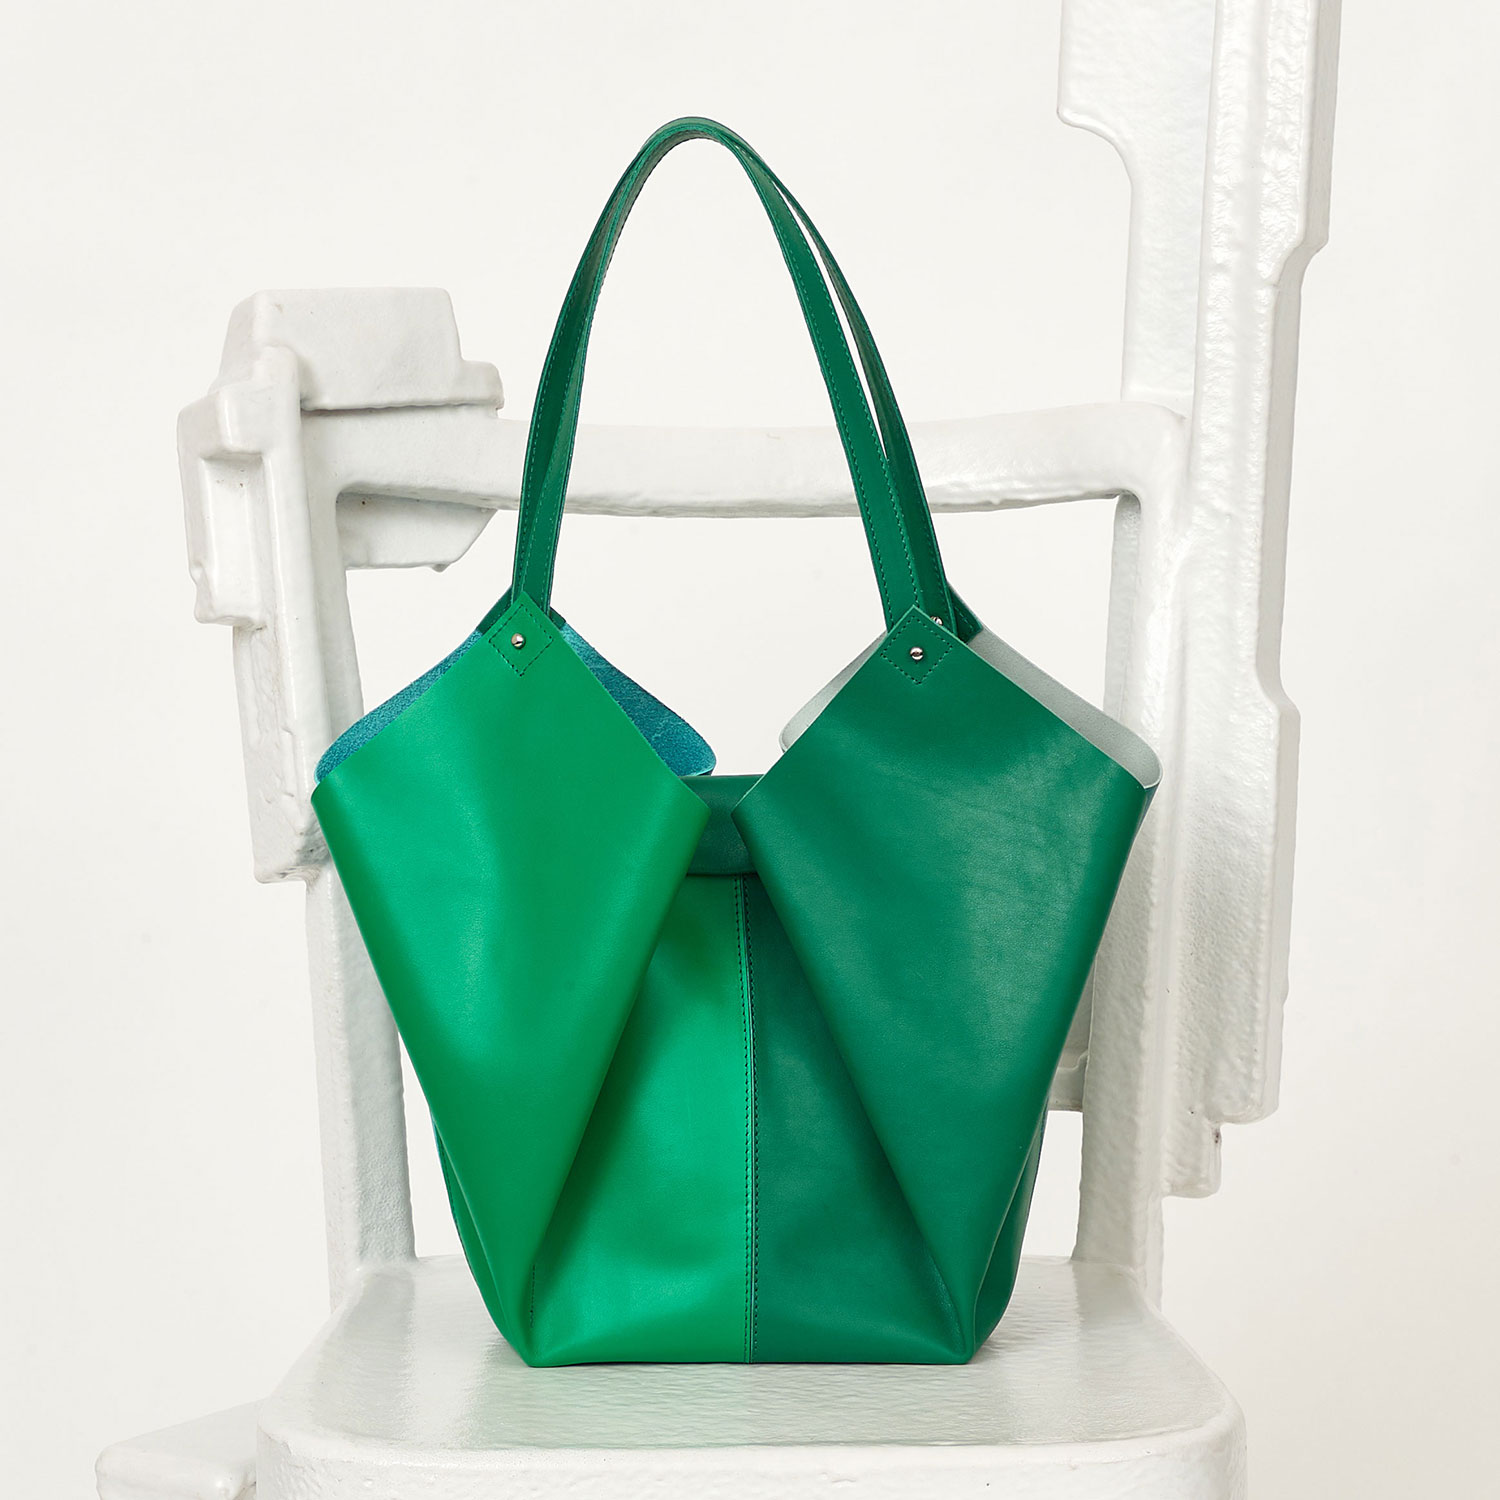 Handmade bags and accessories from Vienna - EVA BLUT